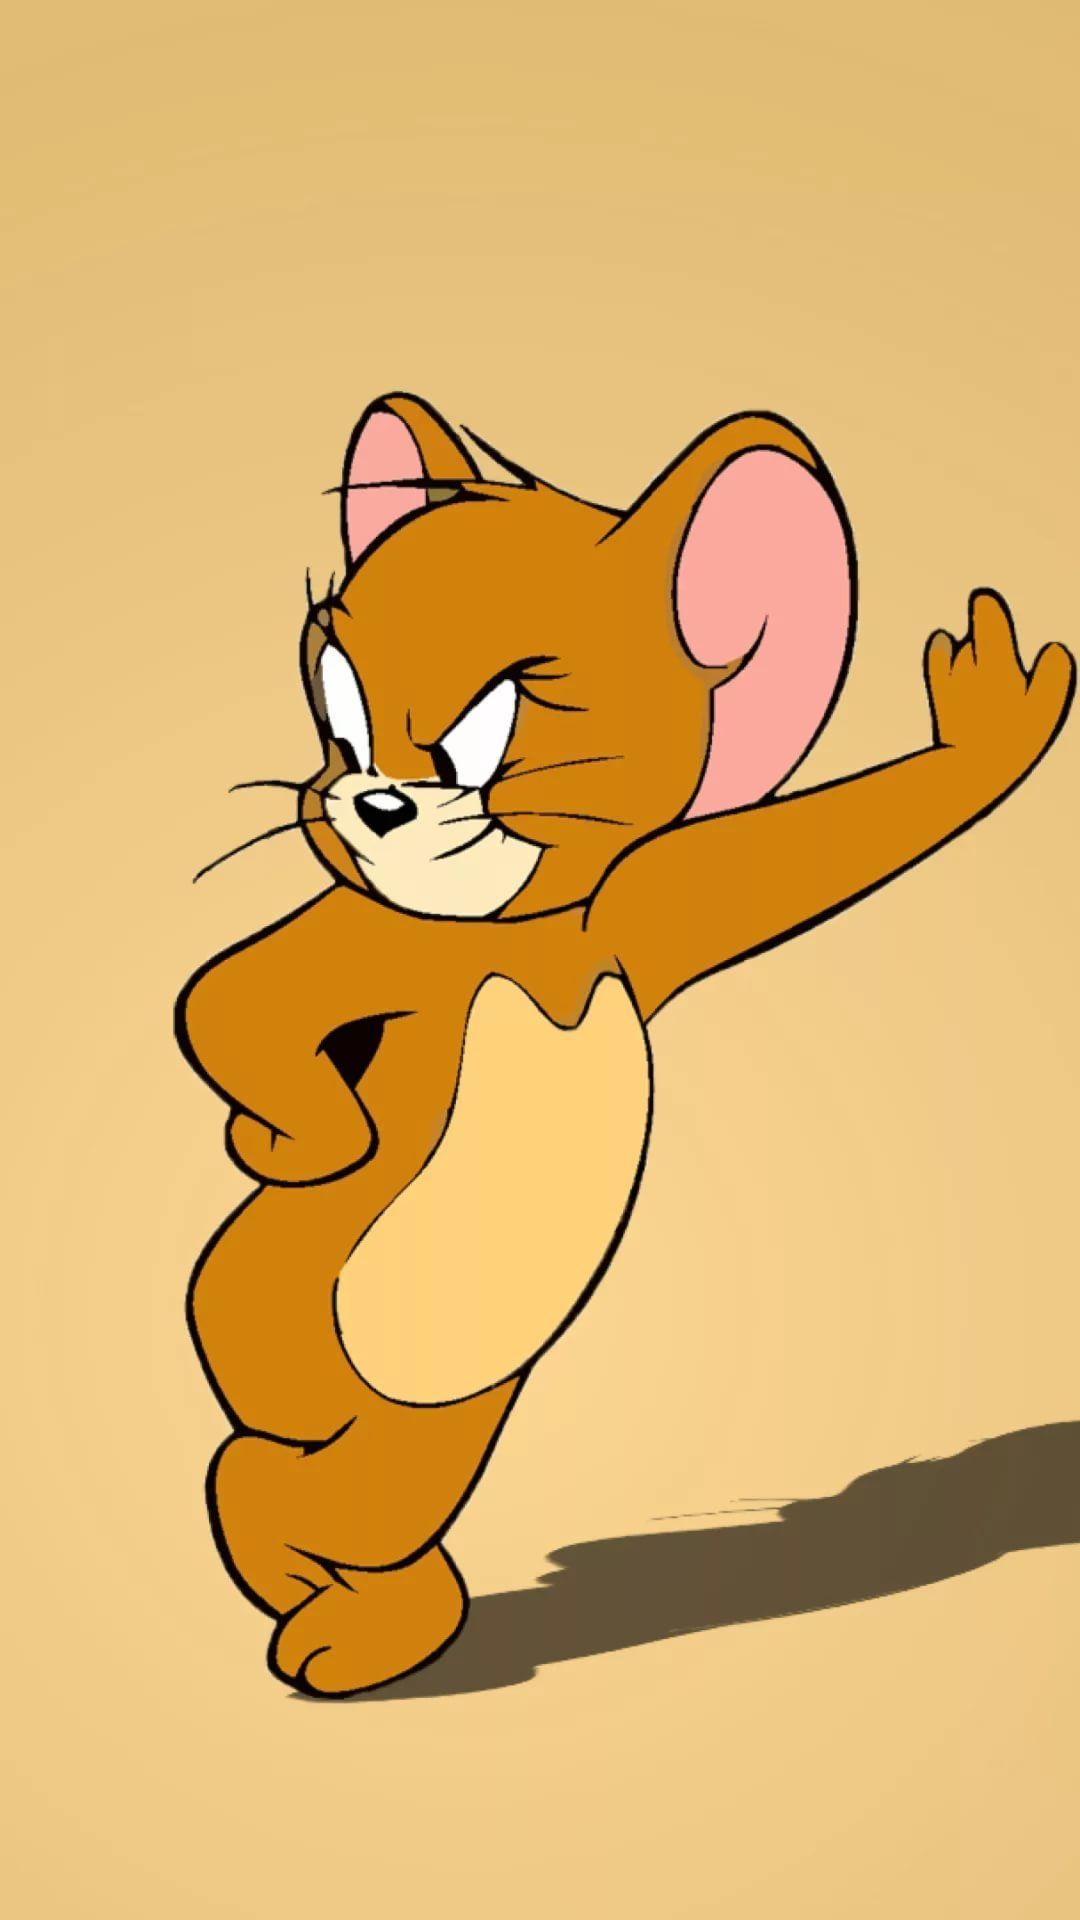 Wallpaper at Washington: 1080p Mobile 1080p Tom And Jerry HD Wallpaper